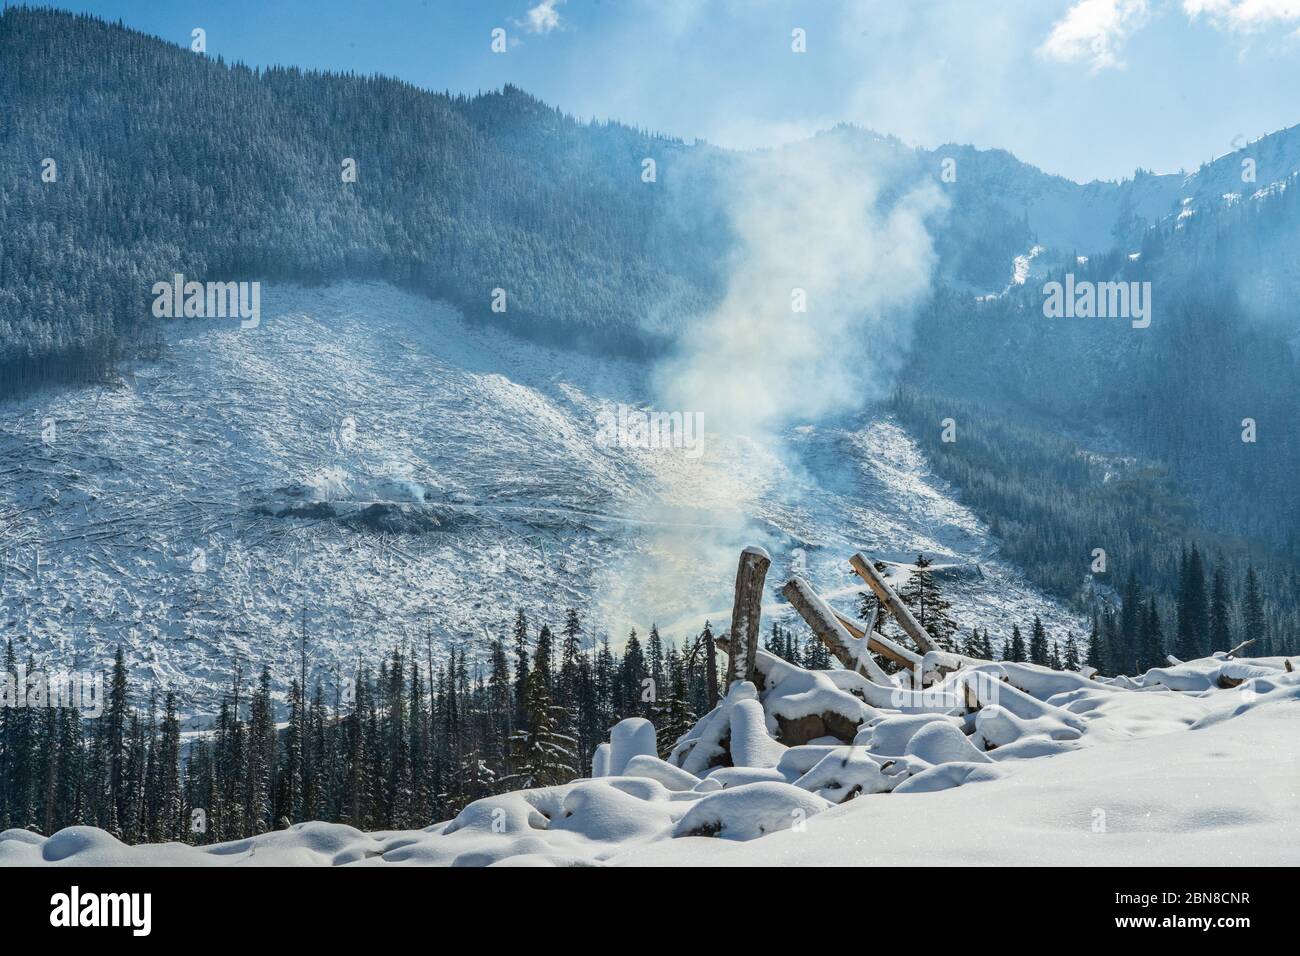 Slash piles burning in the headwaters of the Skagit River,. Stock Photo